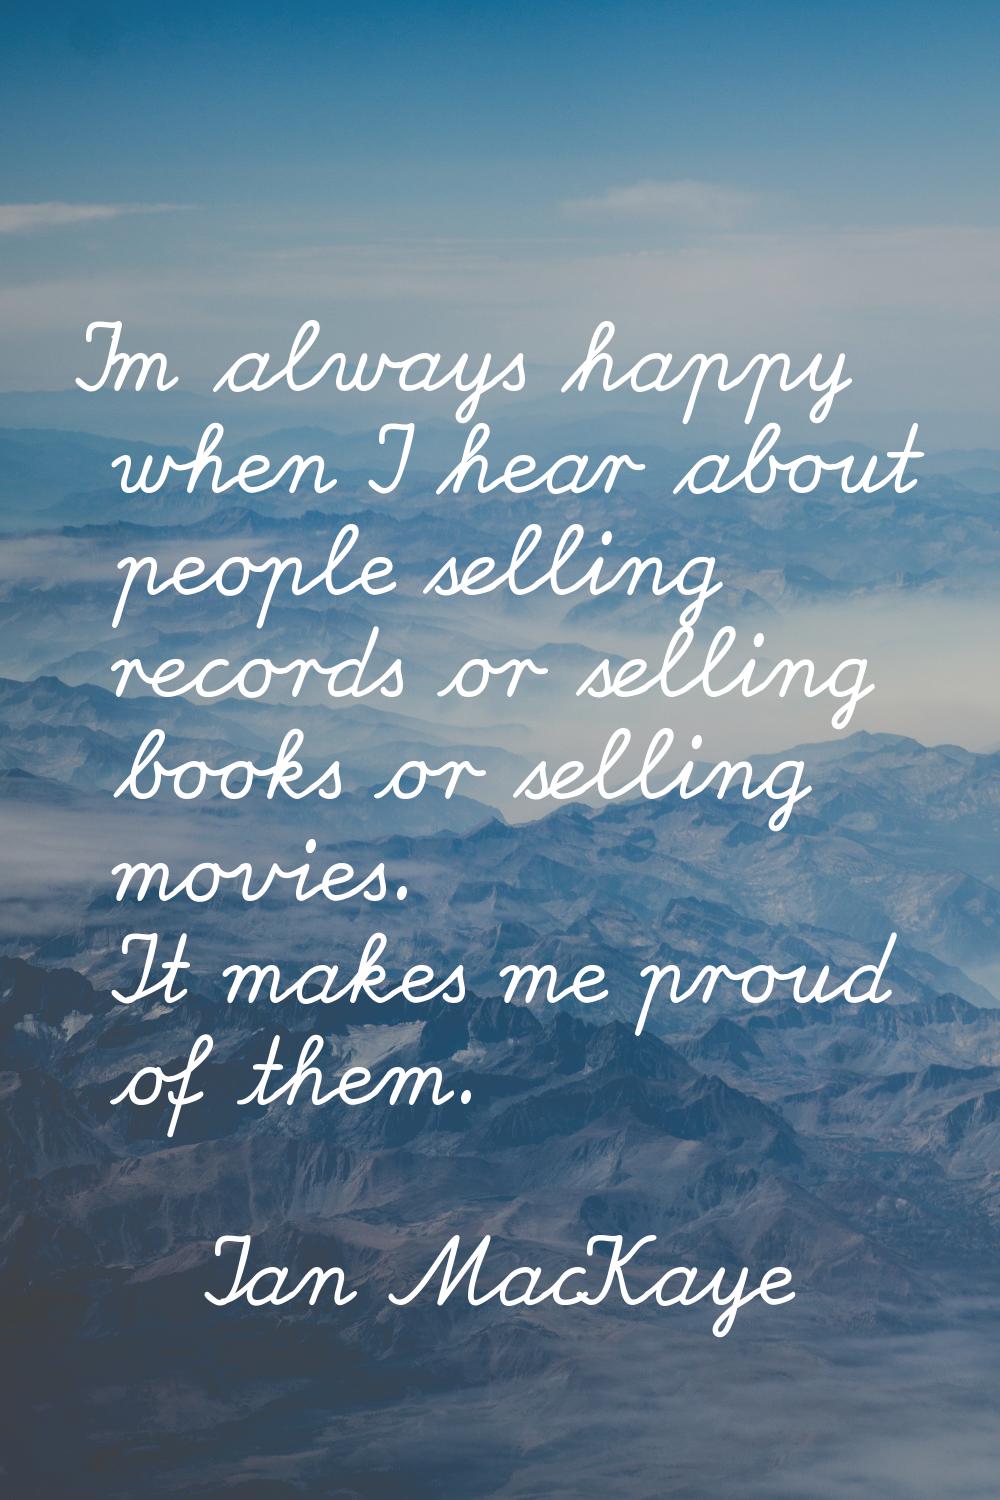 I'm always happy when I hear about people selling records or selling books or selling movies. It ma